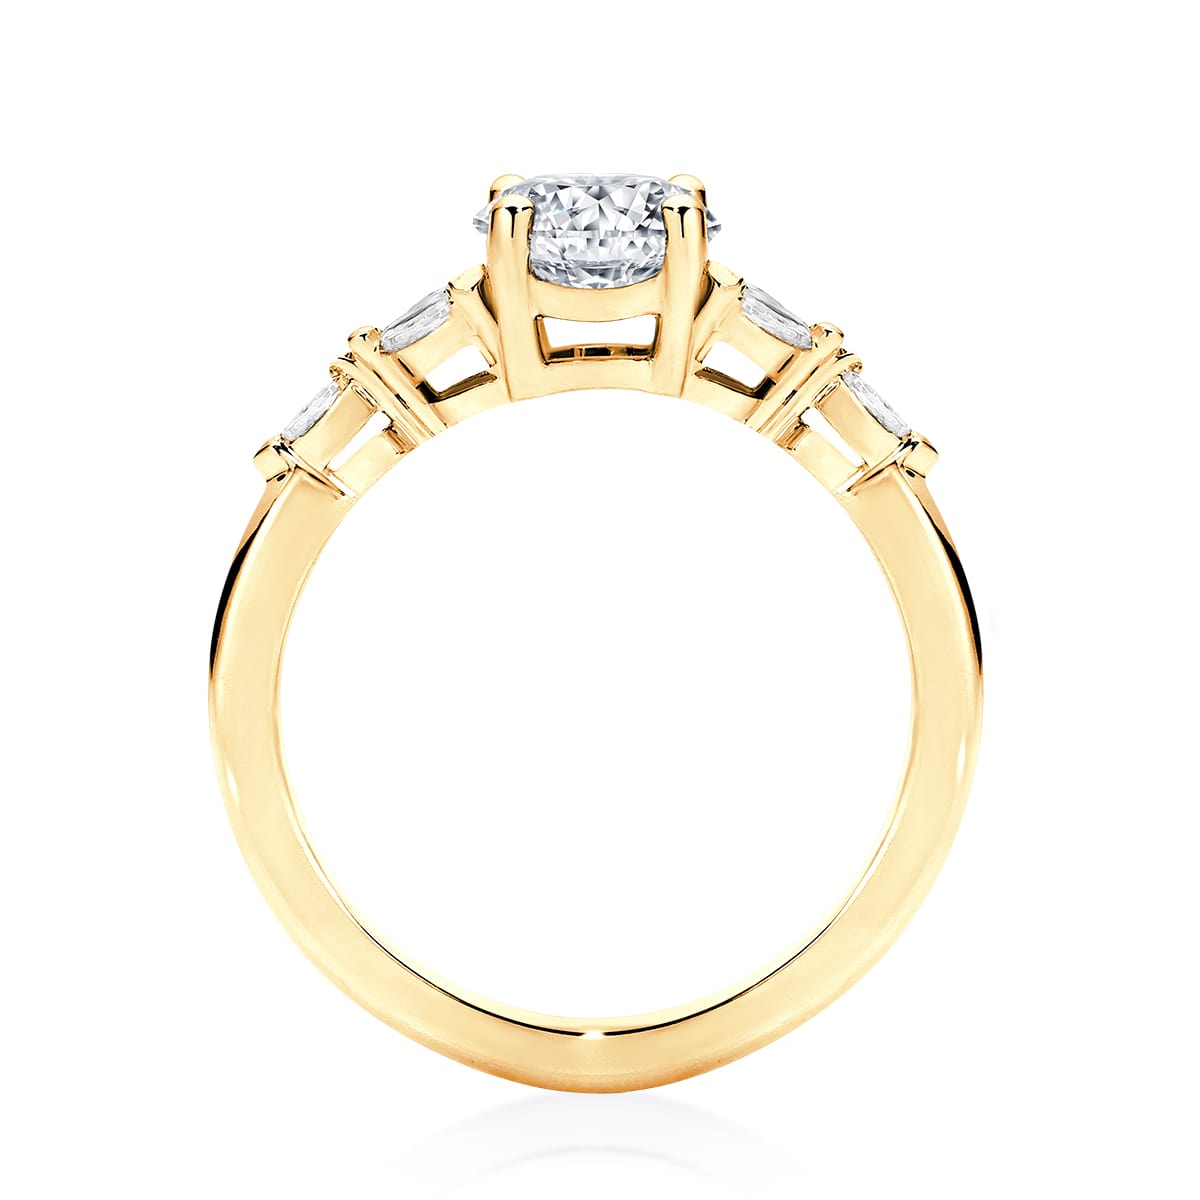 Amalfi Yellow Gold Oval Diamond Engagement Ring with Side Stones